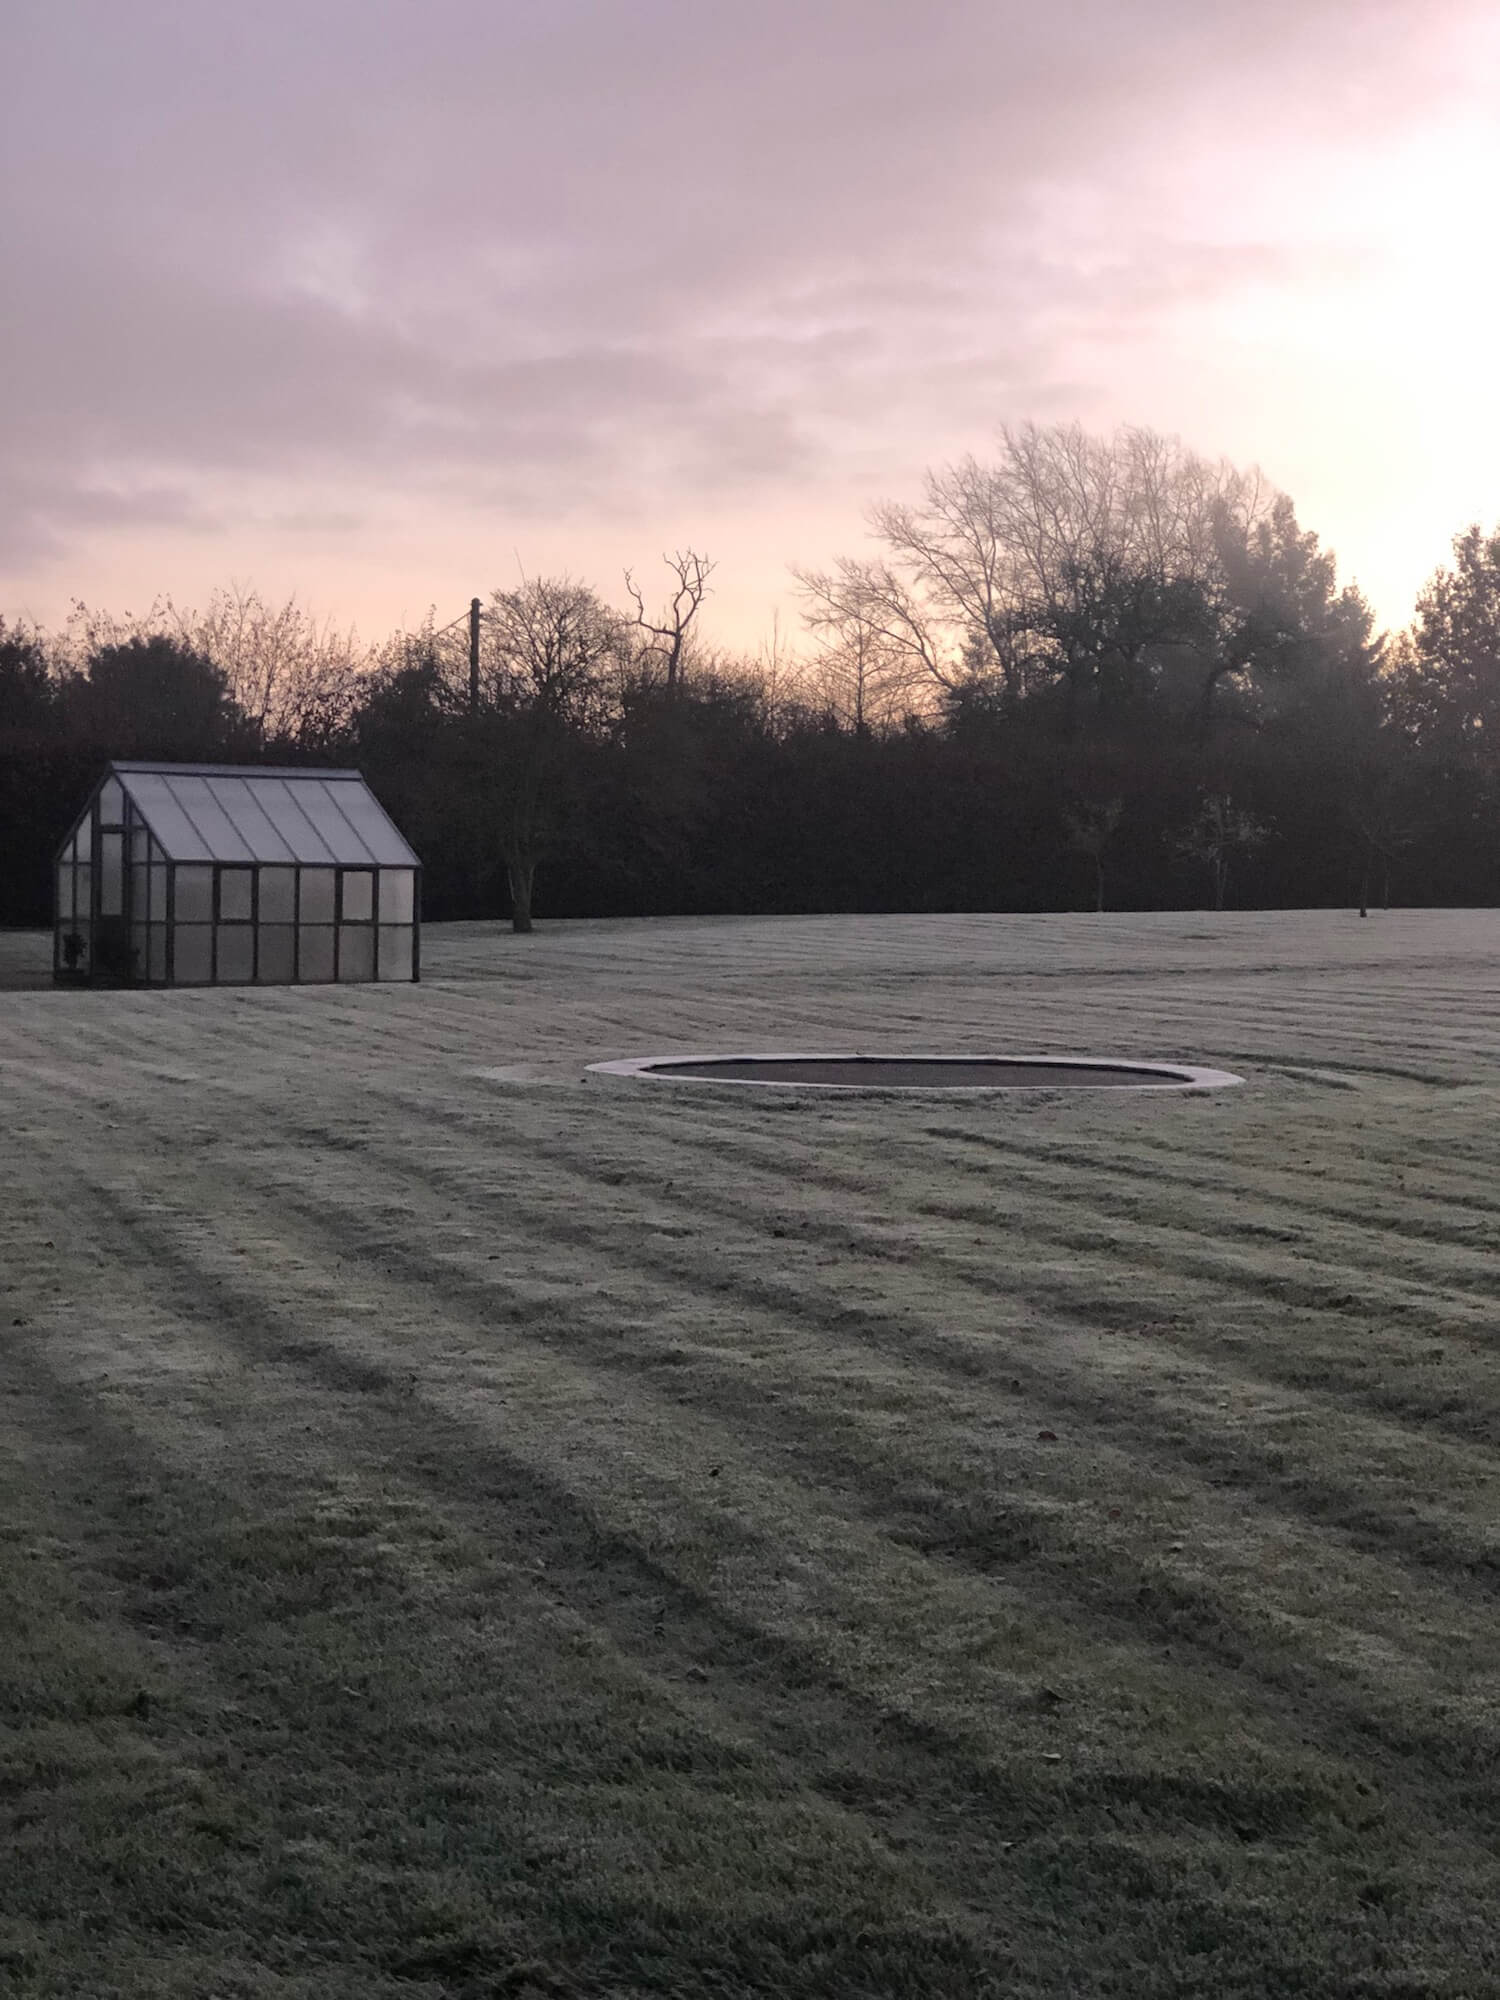 Kingham green house and trampoline in a garden on a winter morning